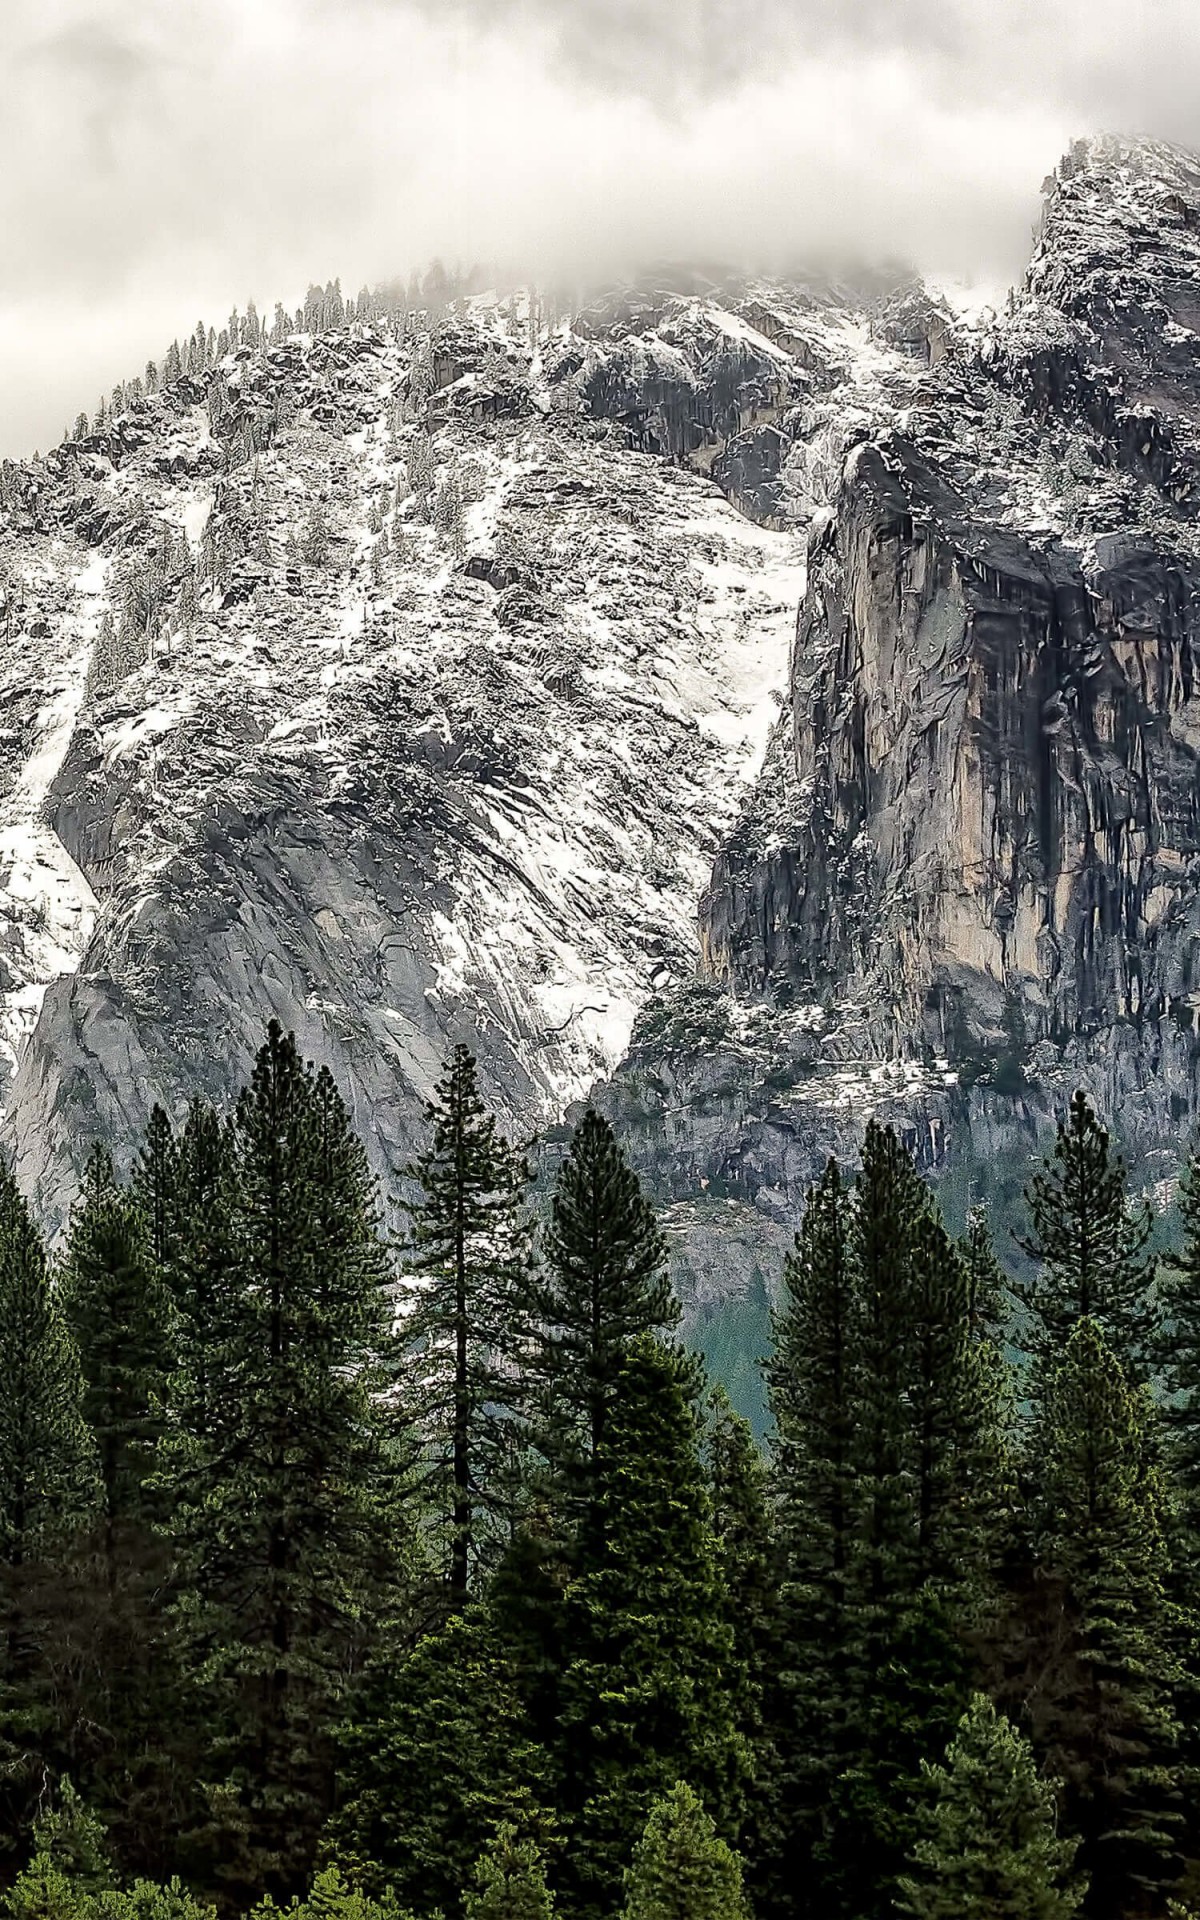 Winter Day at Yosemite National Park Wallpaper for Amazon Kindle Fire HDX